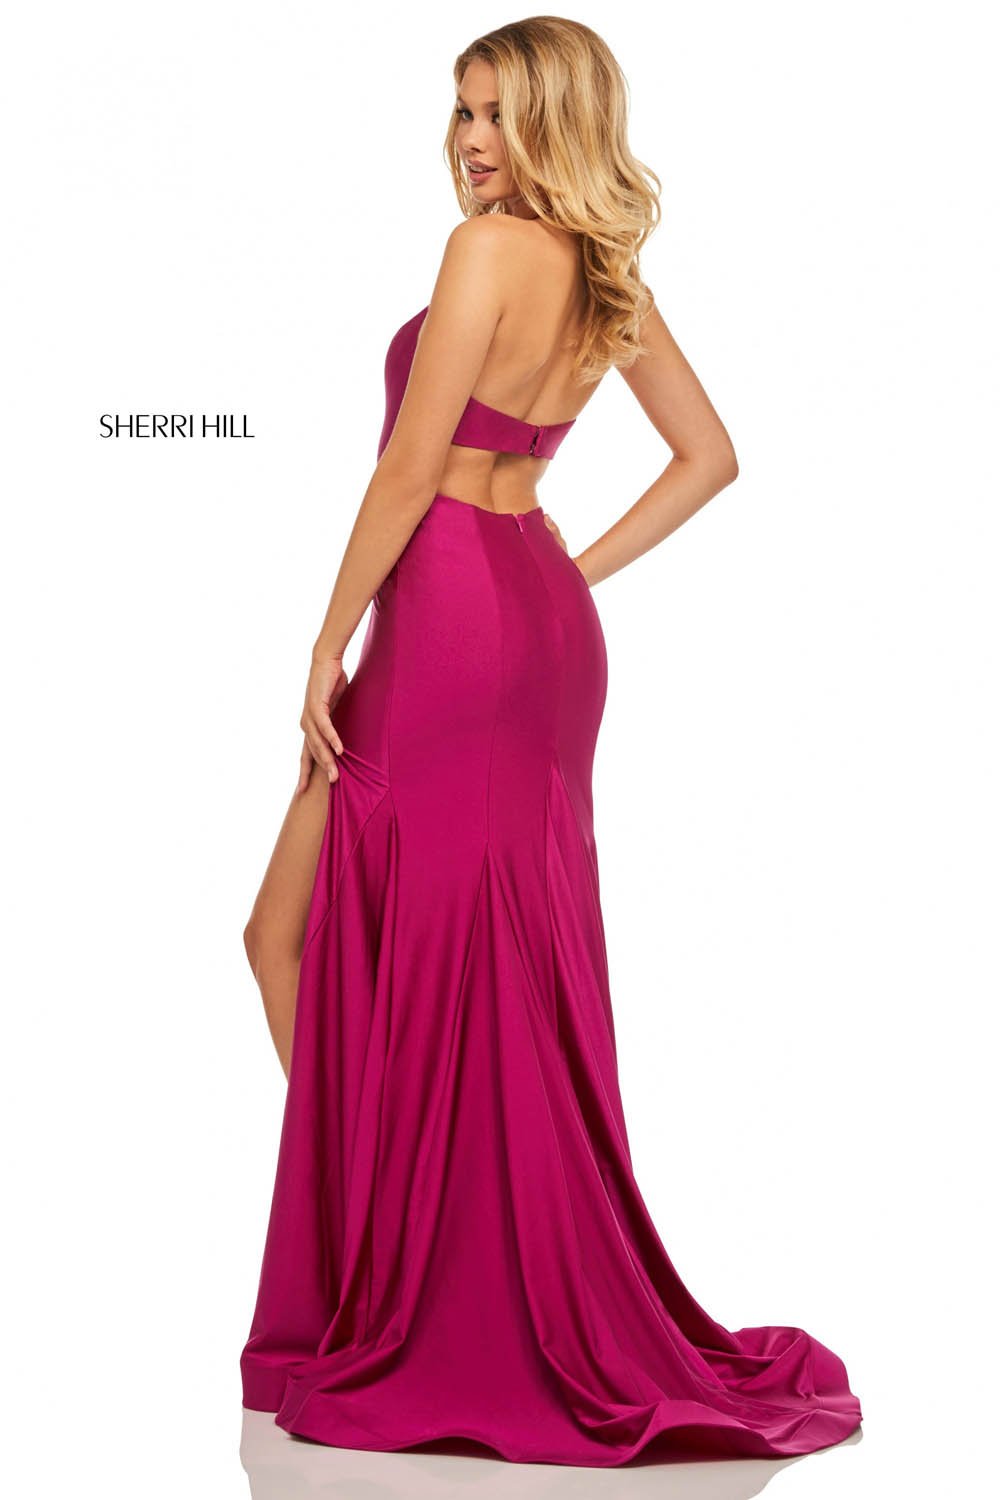 Sherri Hill 52782 dress images in these colors: Wine, Orchid, Royal, Black, Red, Navy, Light Blue, Yellow, Berry, Blush.